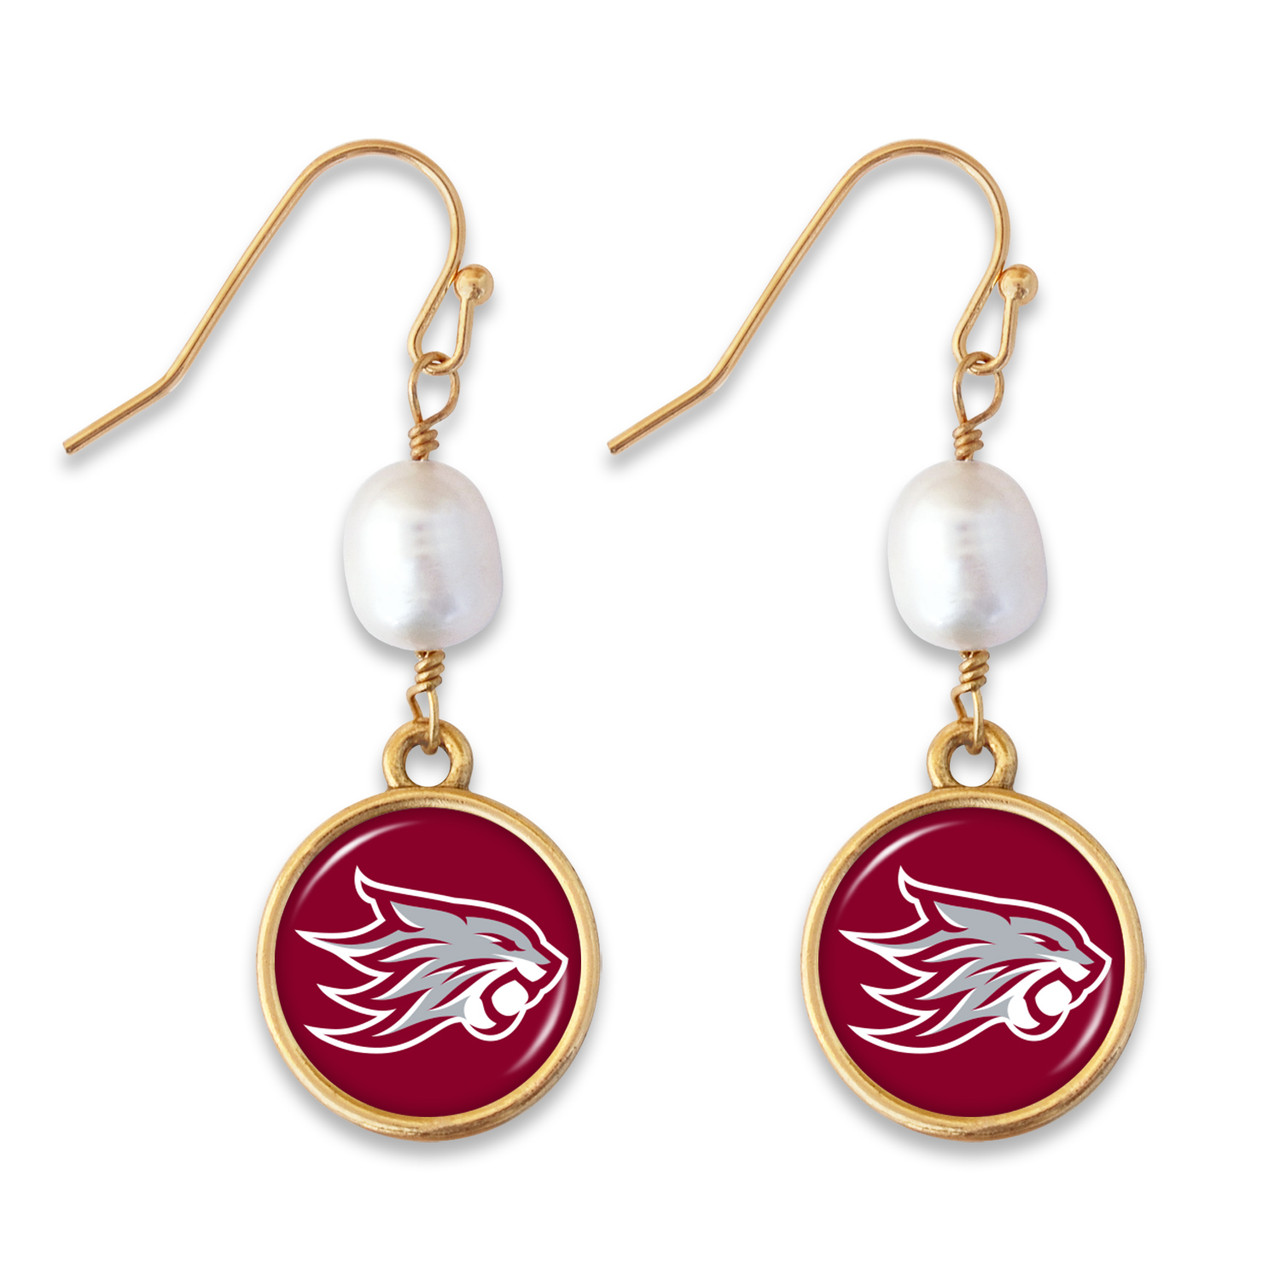 Chico State Wildcats Earrings - Diana